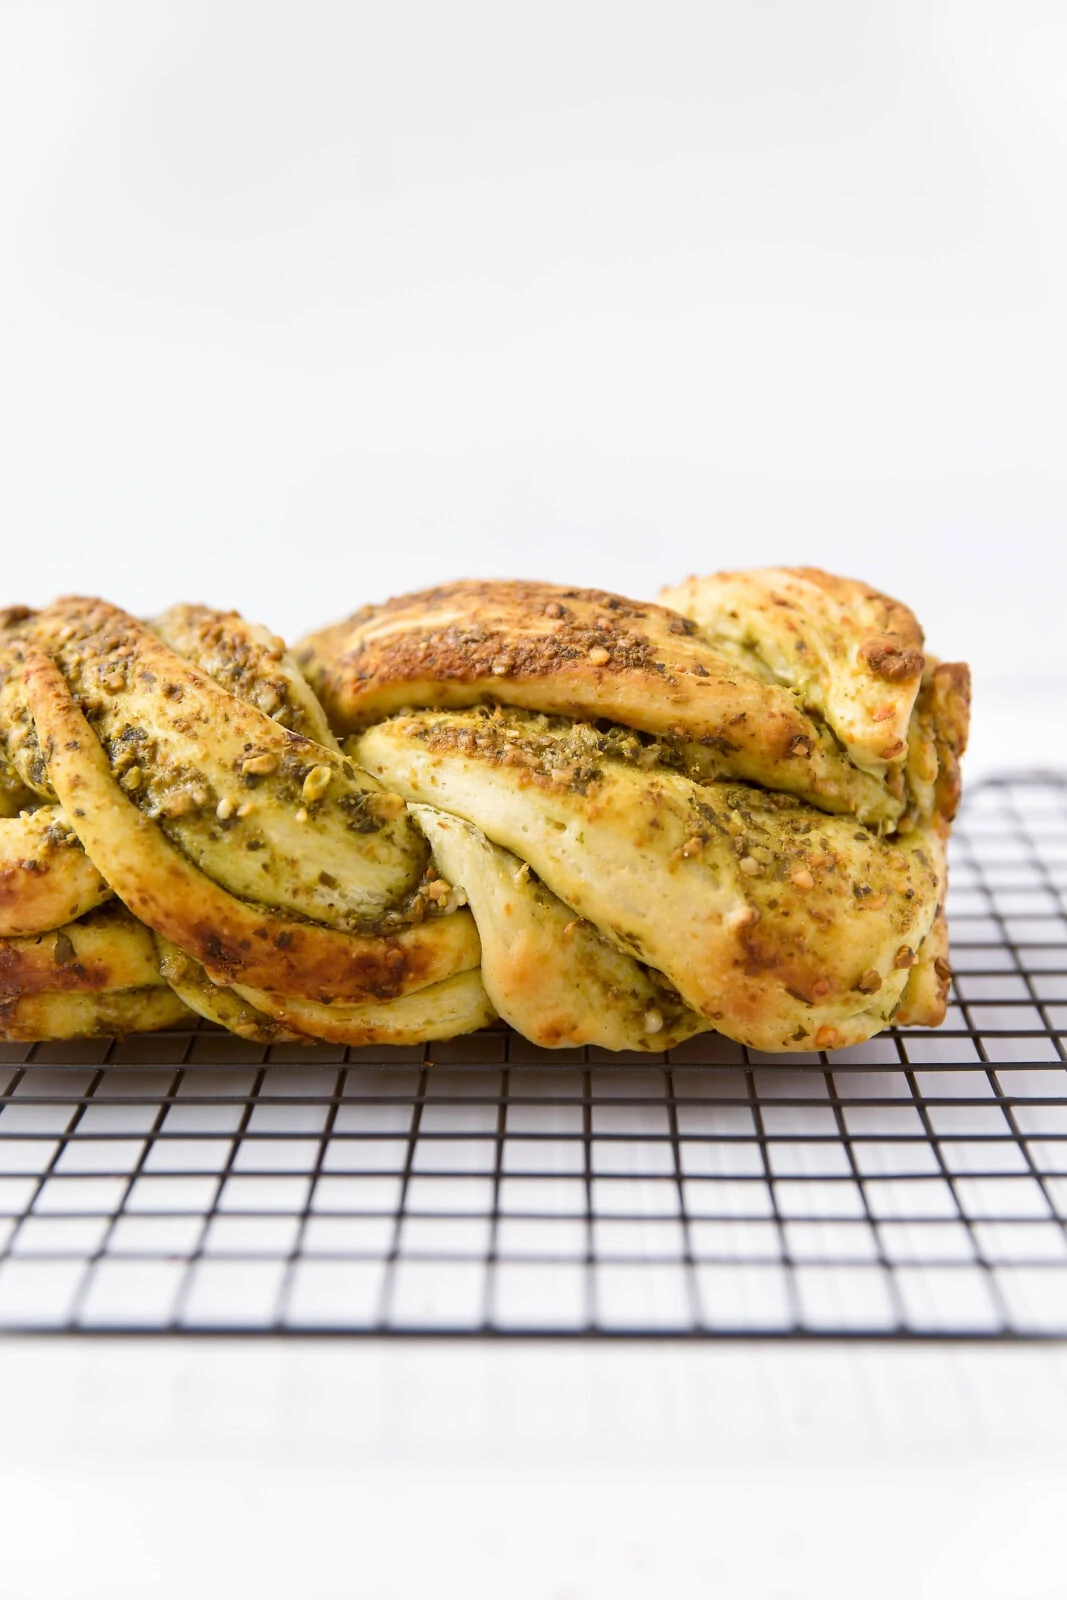 Parmesan Pesto Bread: a braided loaf slathered in homemade pesto and parmesan. Perfect for a late summer night.